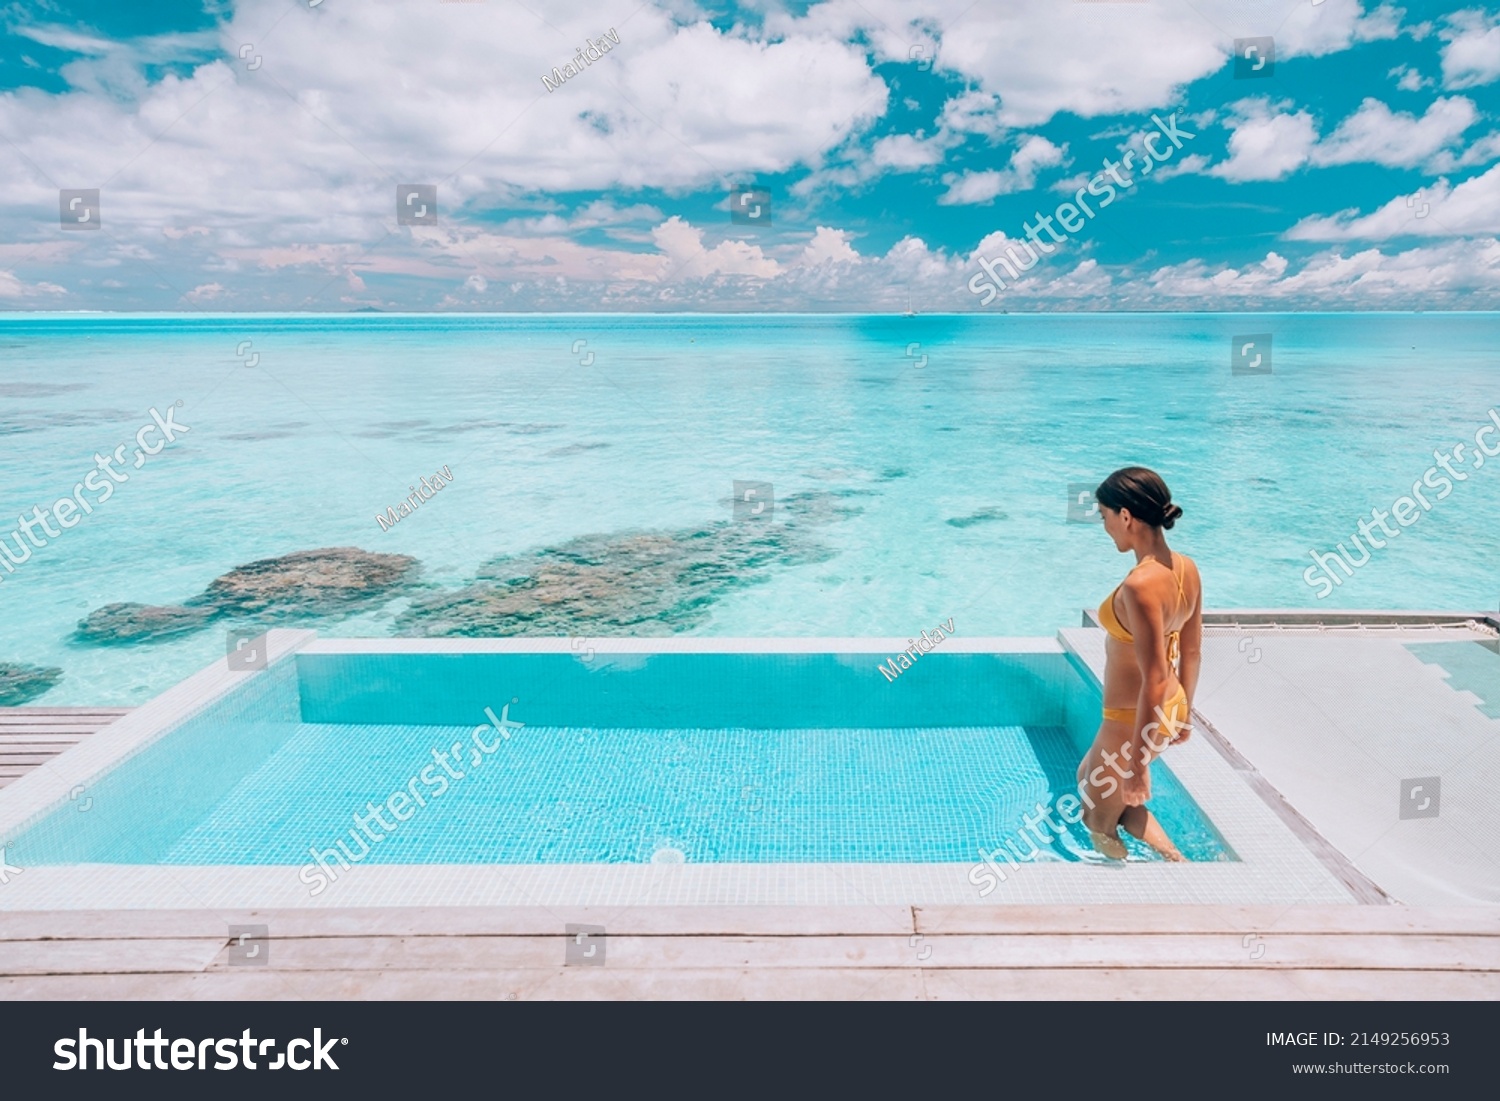 Luxury resort travel vacation destination idyllic overwater bungalow villa woman relaxing by infinity pool. Social media influencer traveler luxurious high end lifestyle. #2149256953